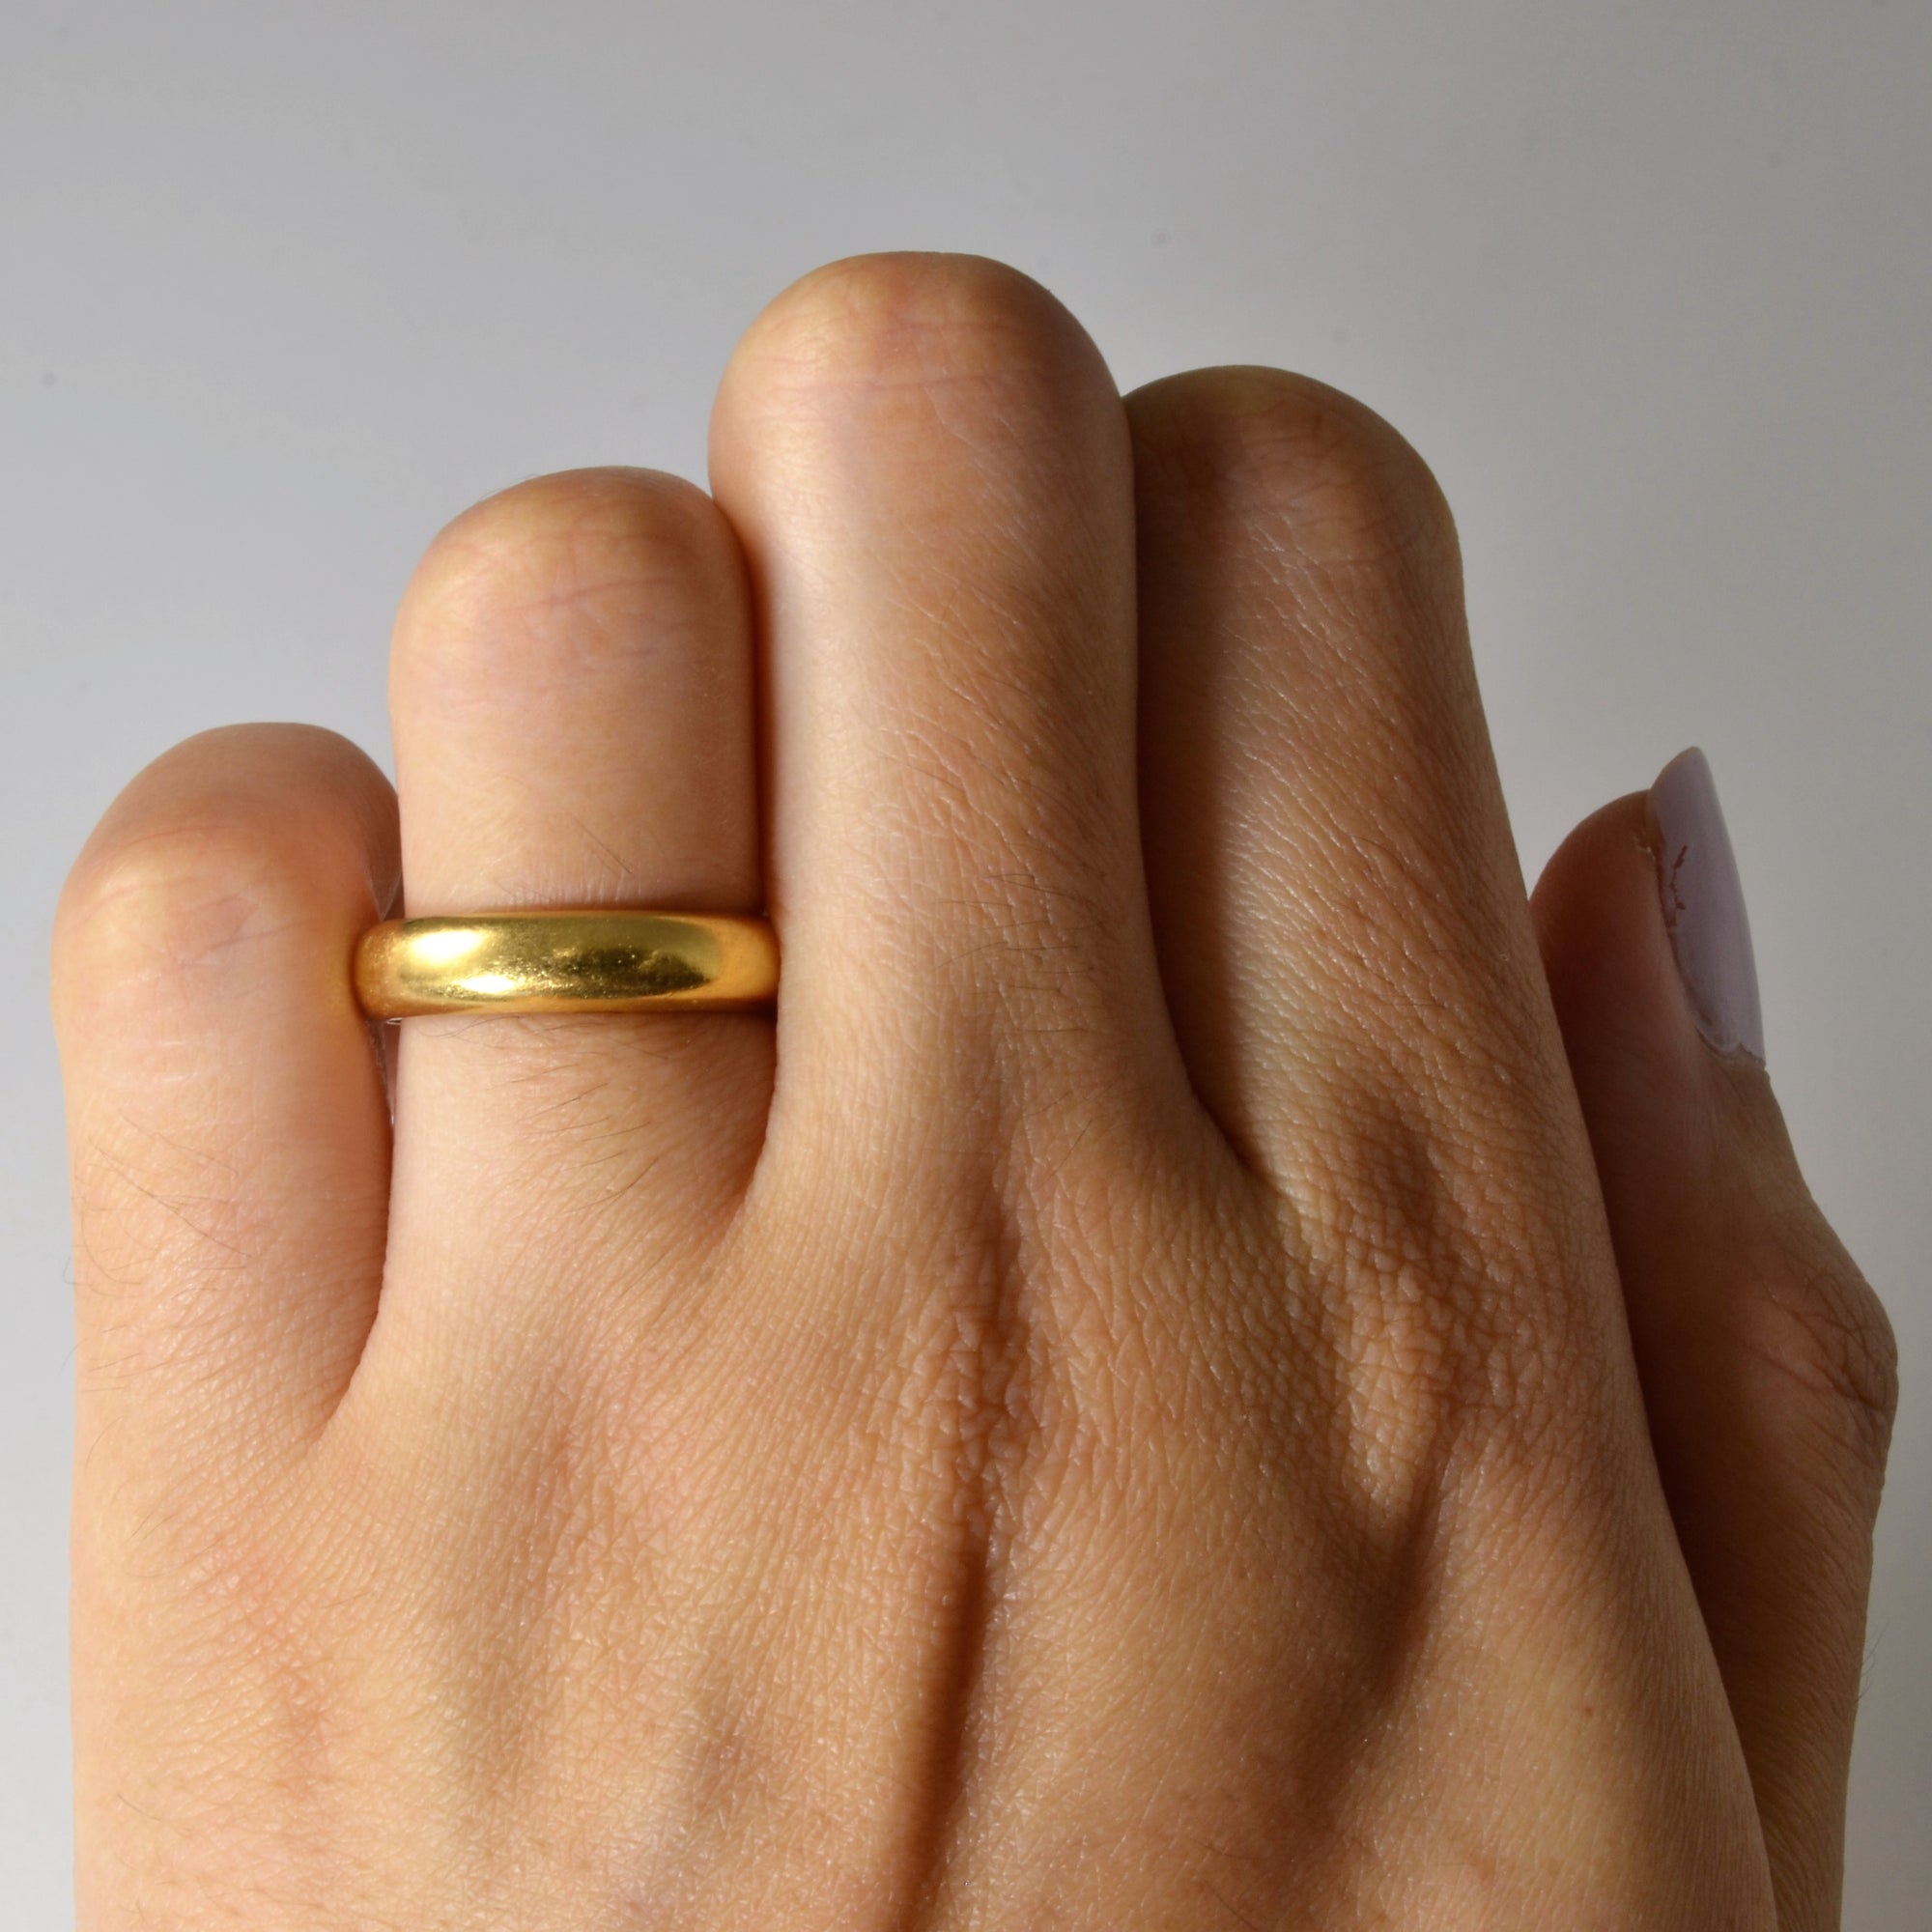 Early 1900s Yellow Gold Band | SZ 6.5 |